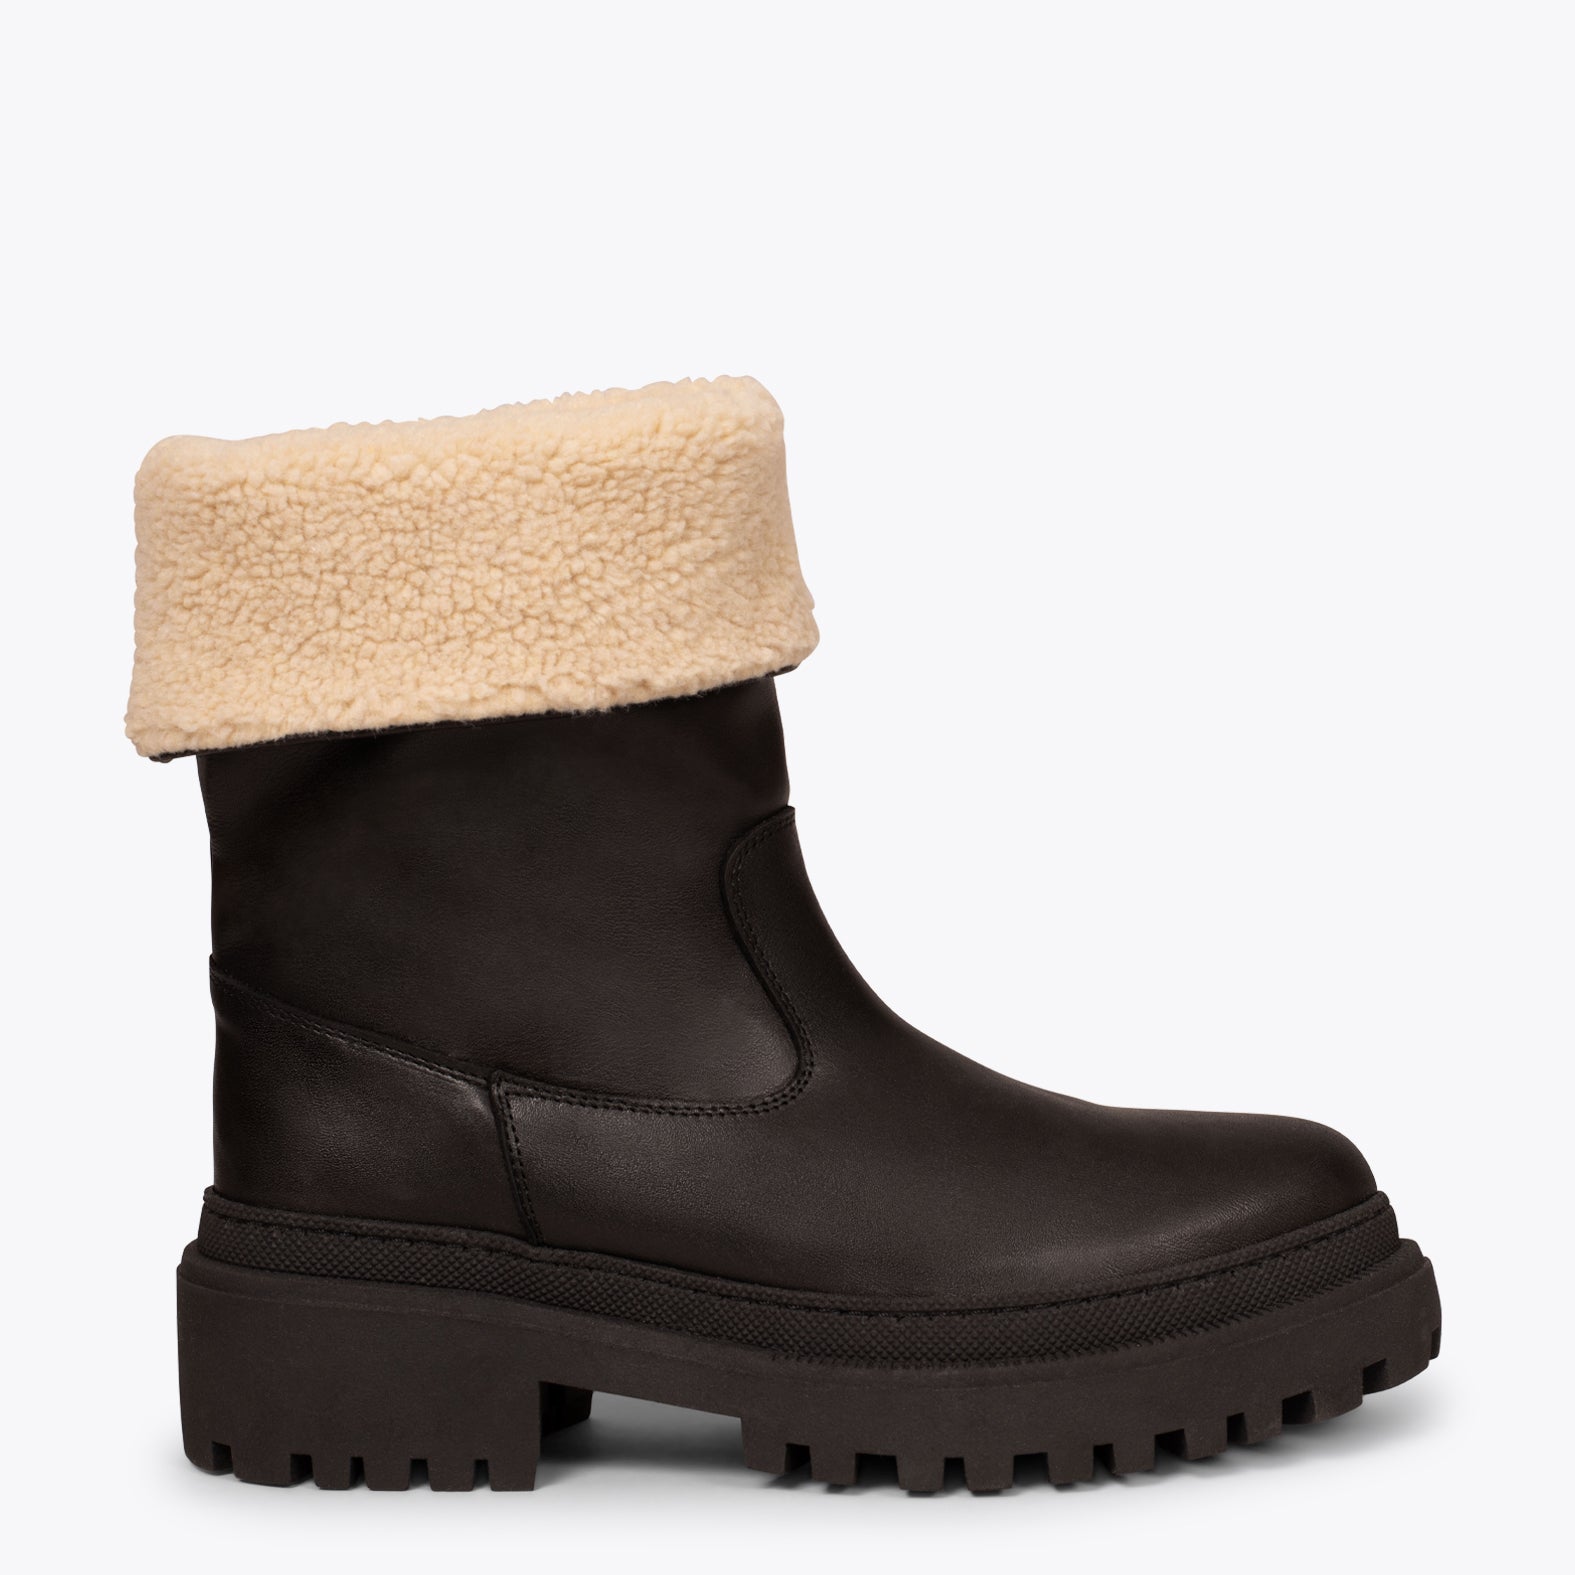 POLAR – BLACK boot crafted in soft nappa leather